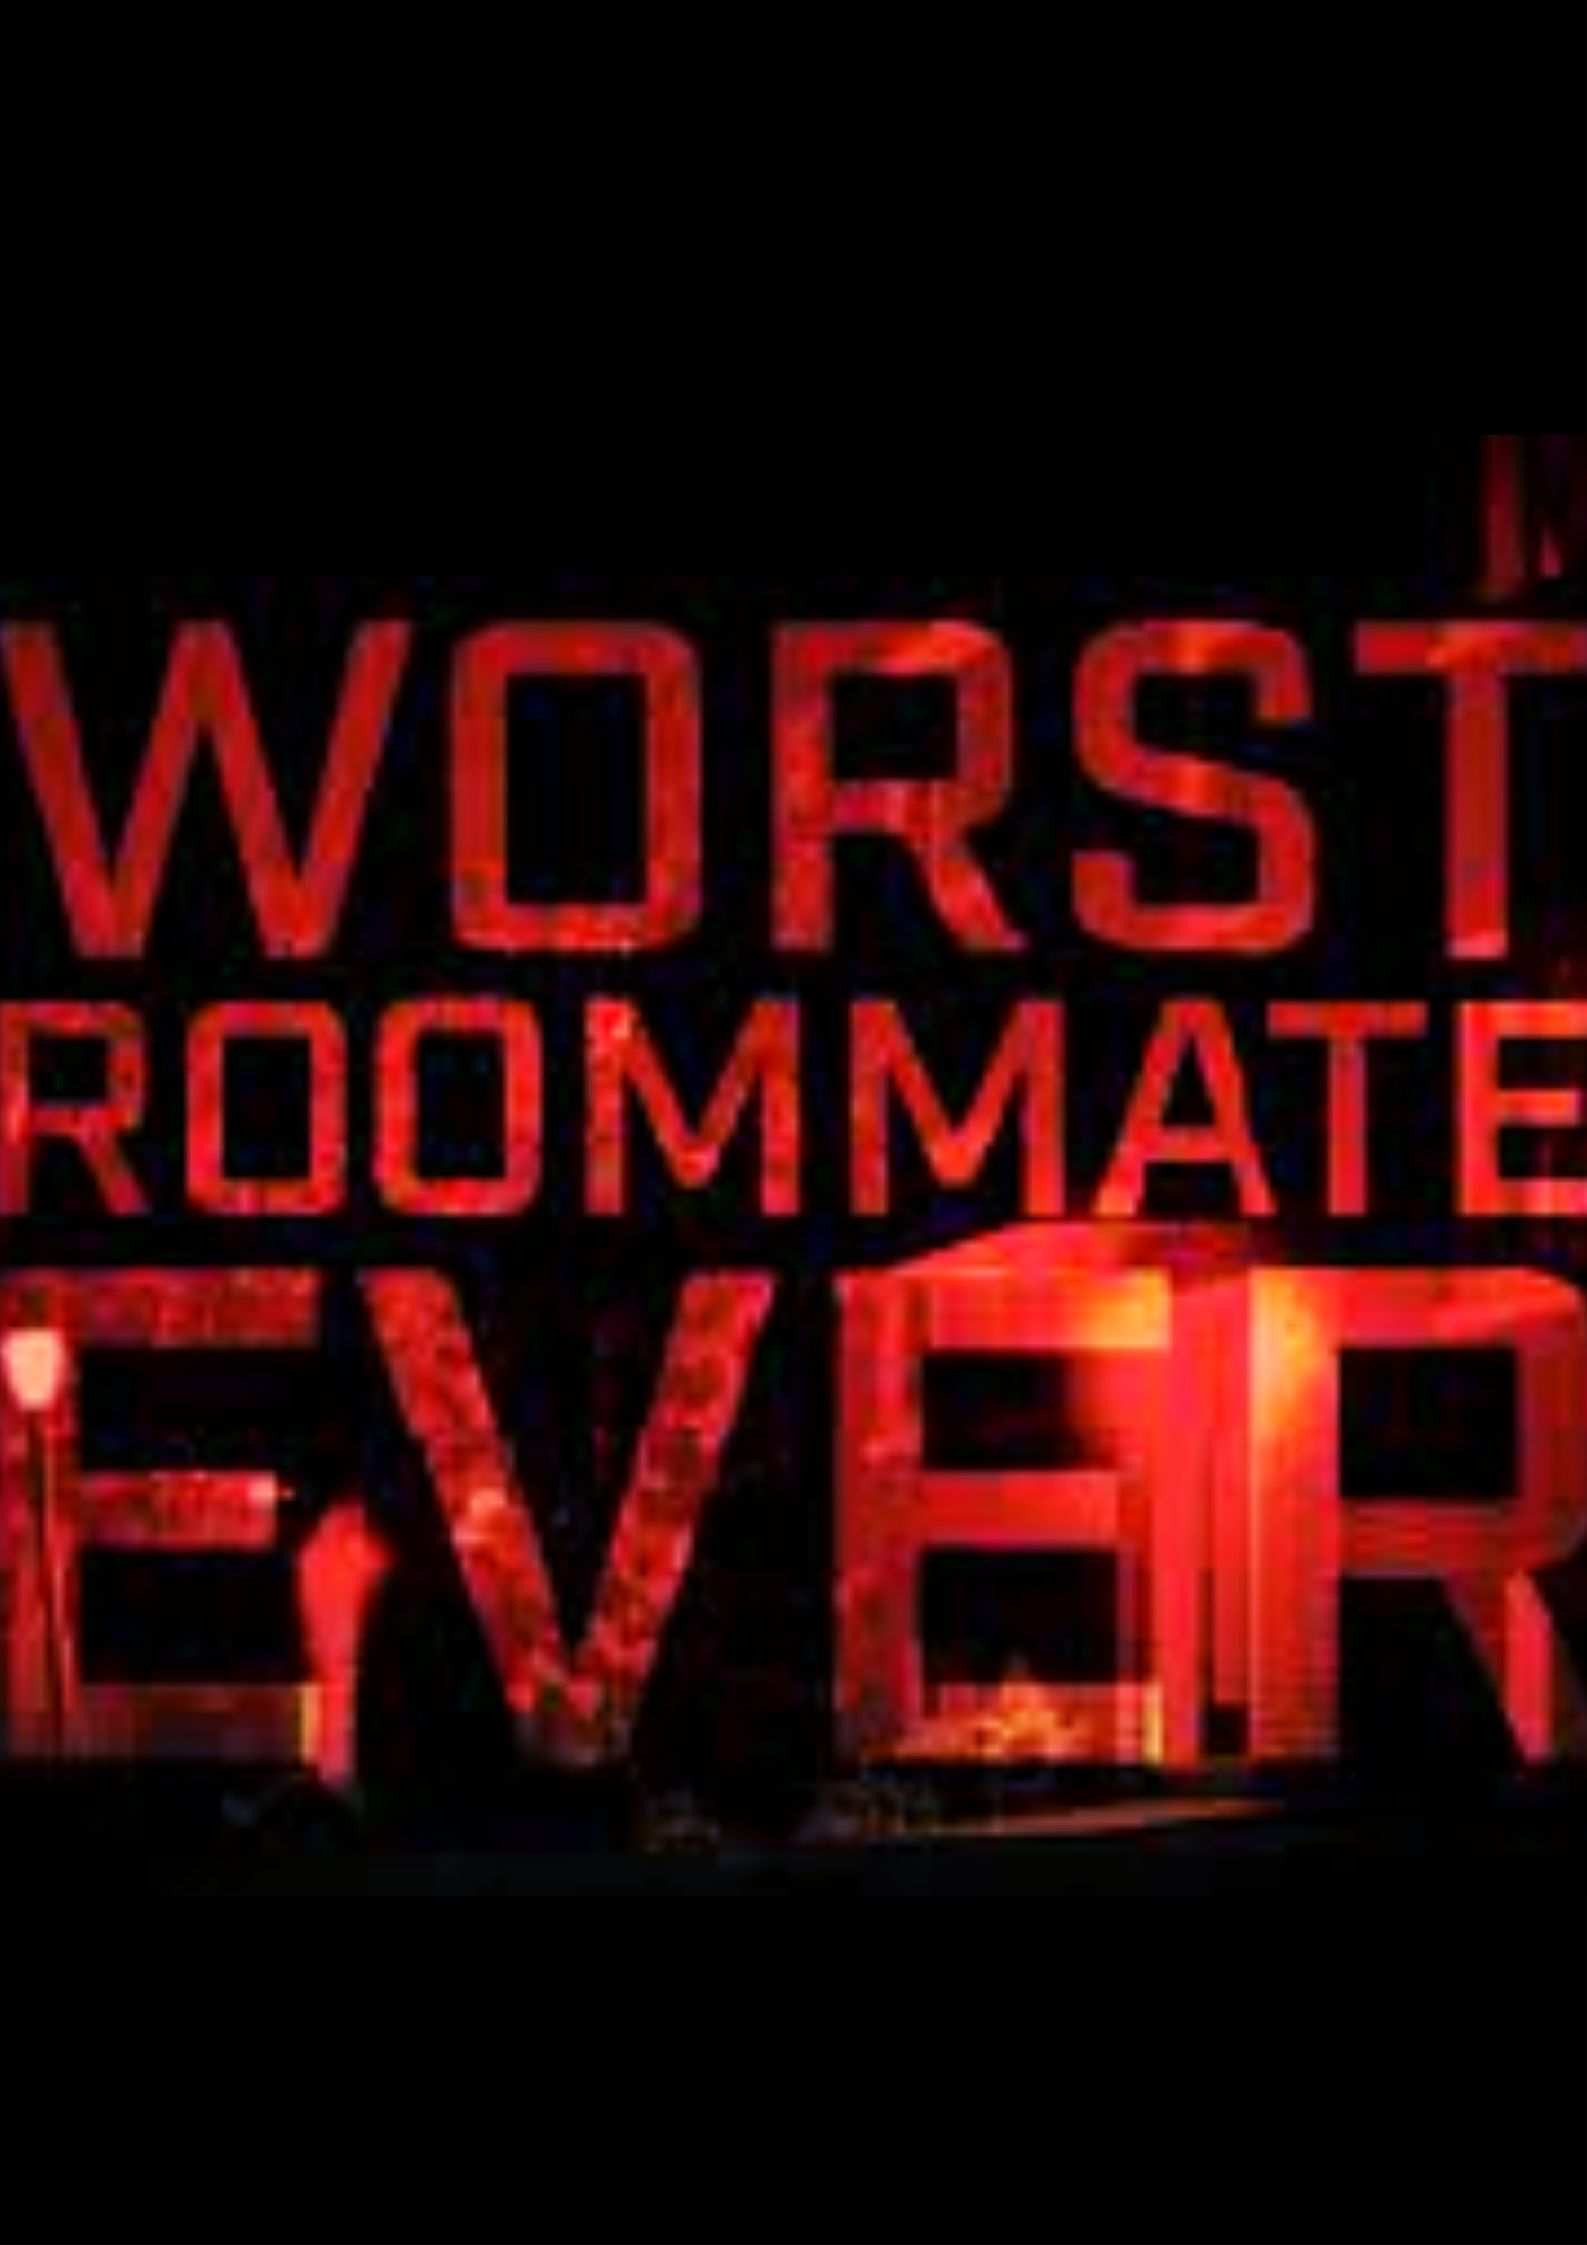 Worst Roommate Ever Parents guide and age rating | 2022